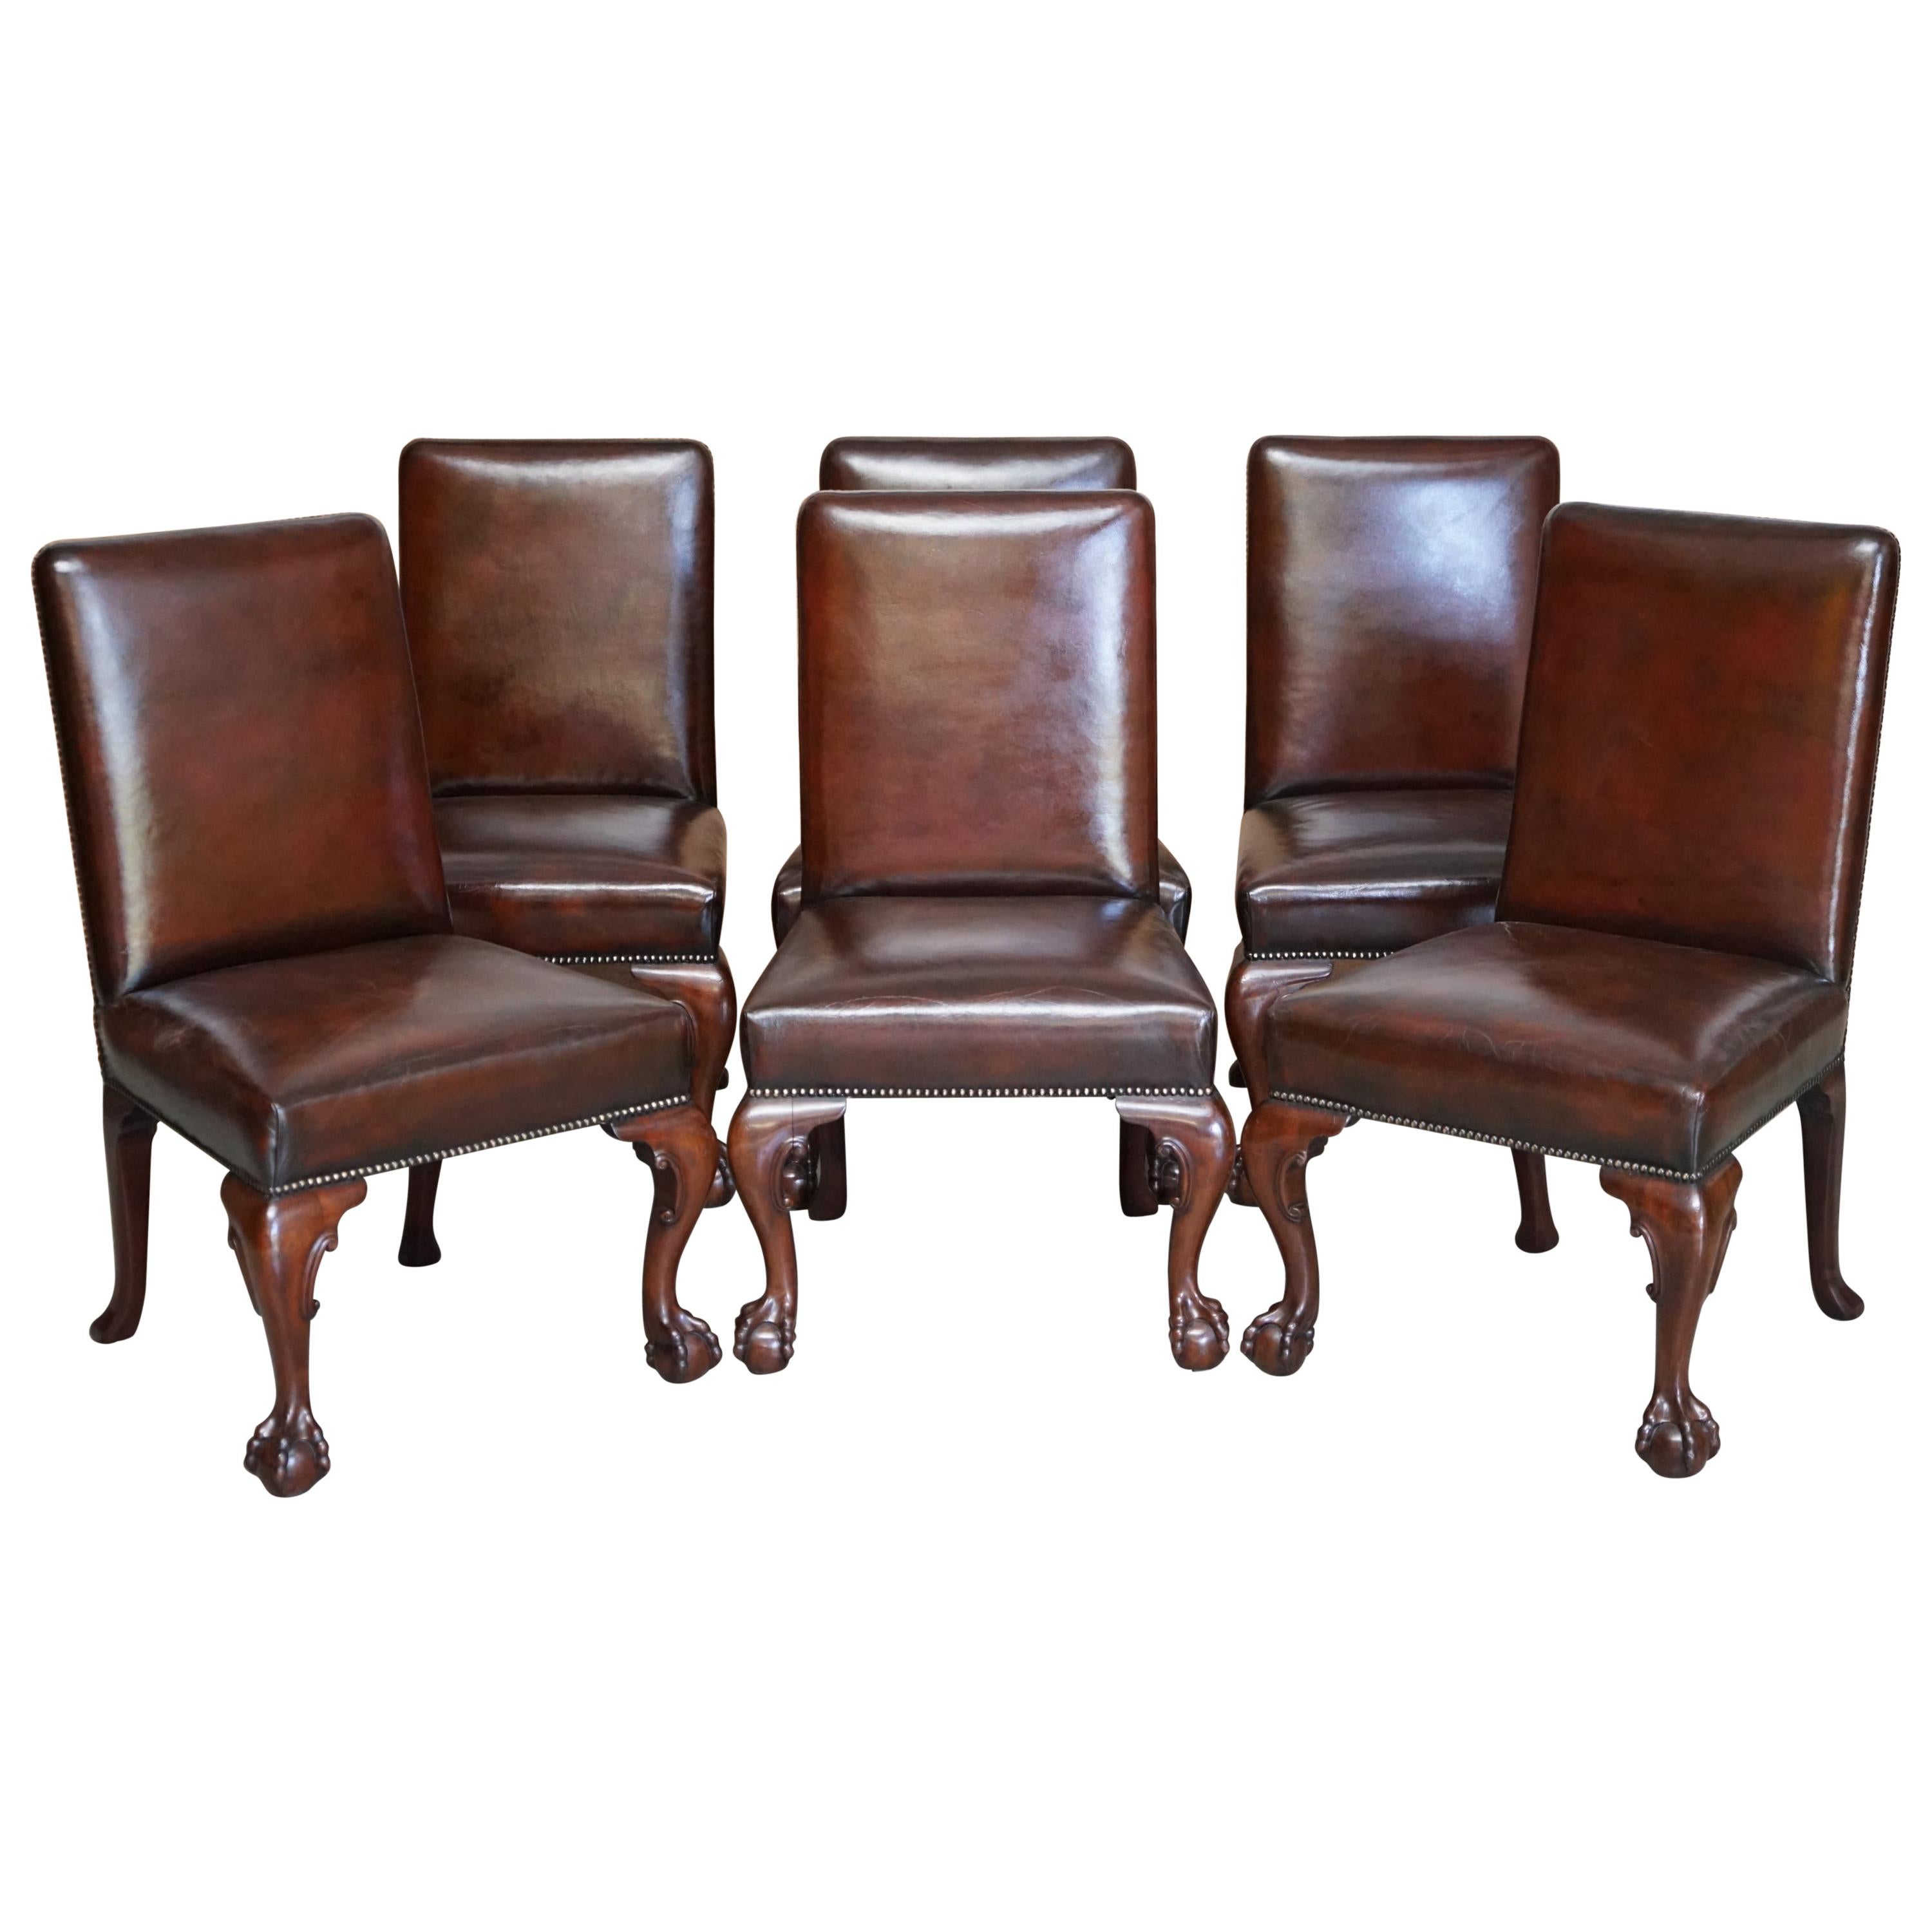 Six Stunning Fully Restored Brown Leather Hardwood Claw & Ball Dining Chairs 6